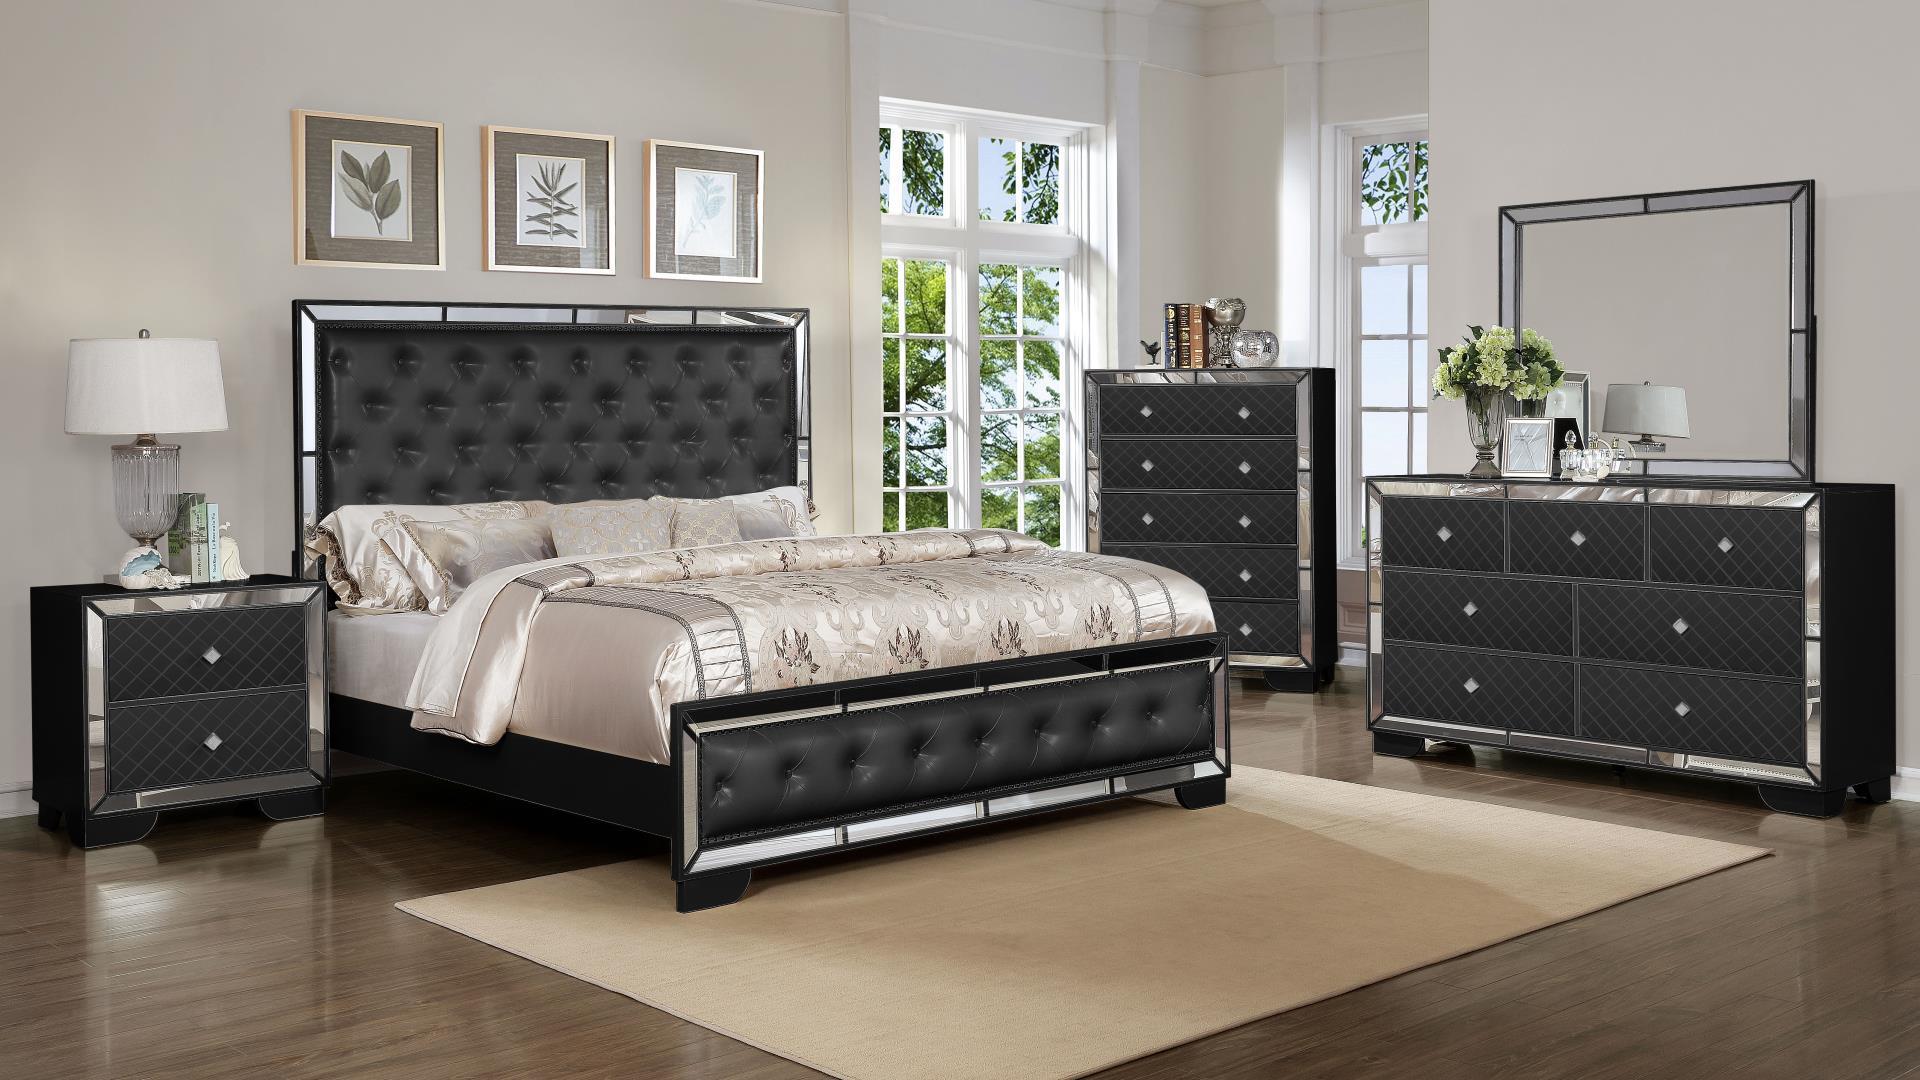 

    
Glam Black & Mirrored Inlays Button Tufted Queen Bed MADISON Galaxy Home Modern
